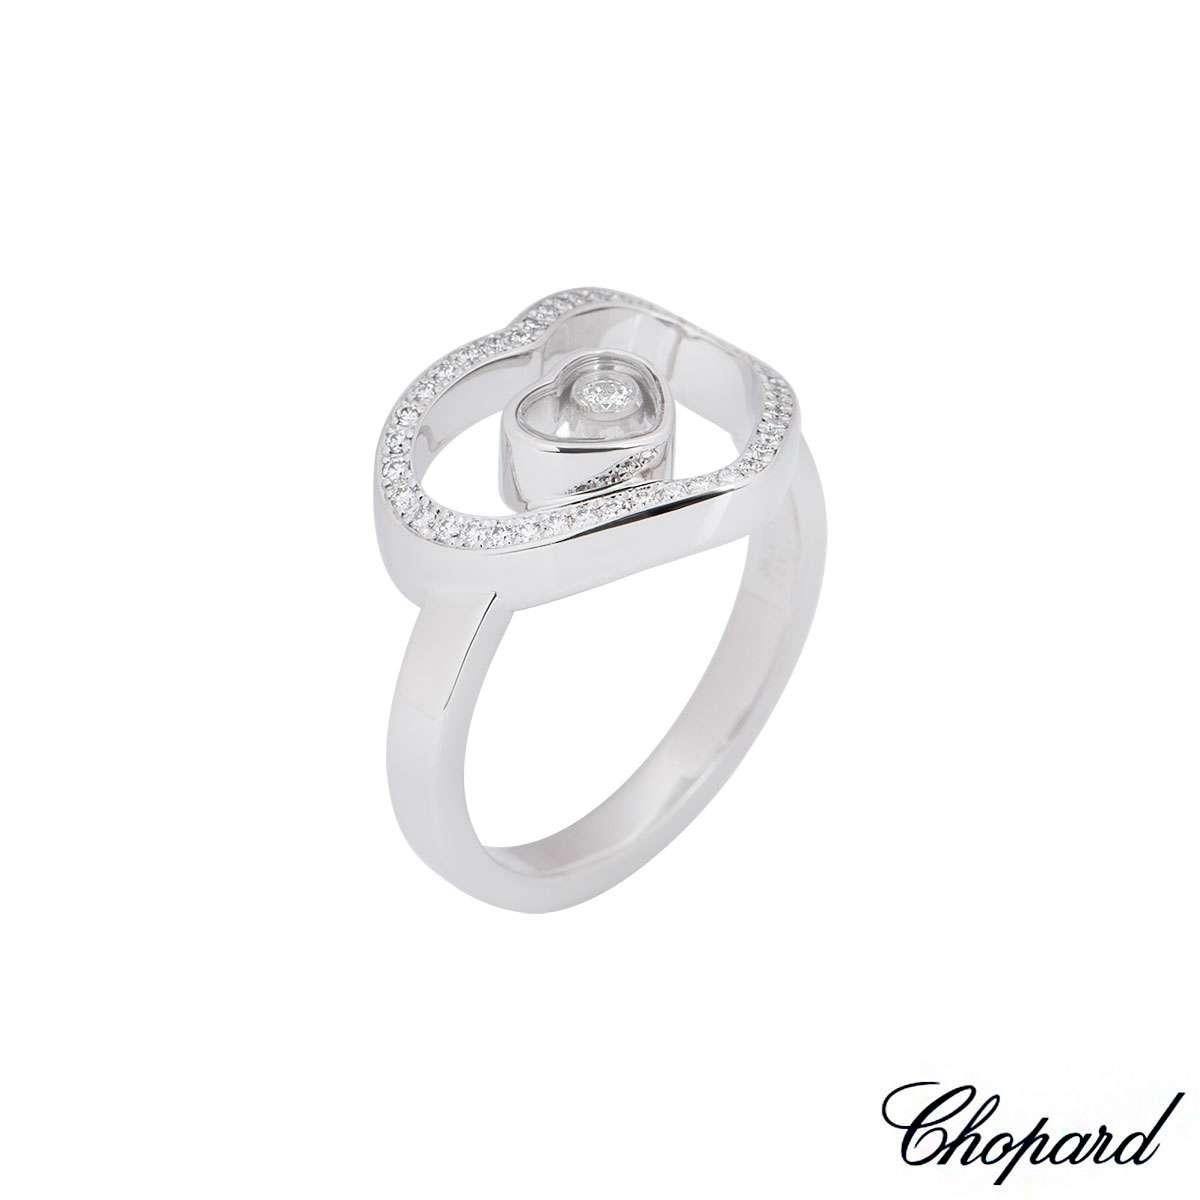 An 18k white gold ring from the Happy Diamonds collection by Chopard. The ring features a large diamond set openwork heart with a smaller heart set within the centre, encasing a single floating diamond. There are a total of 43 round brilliant cut